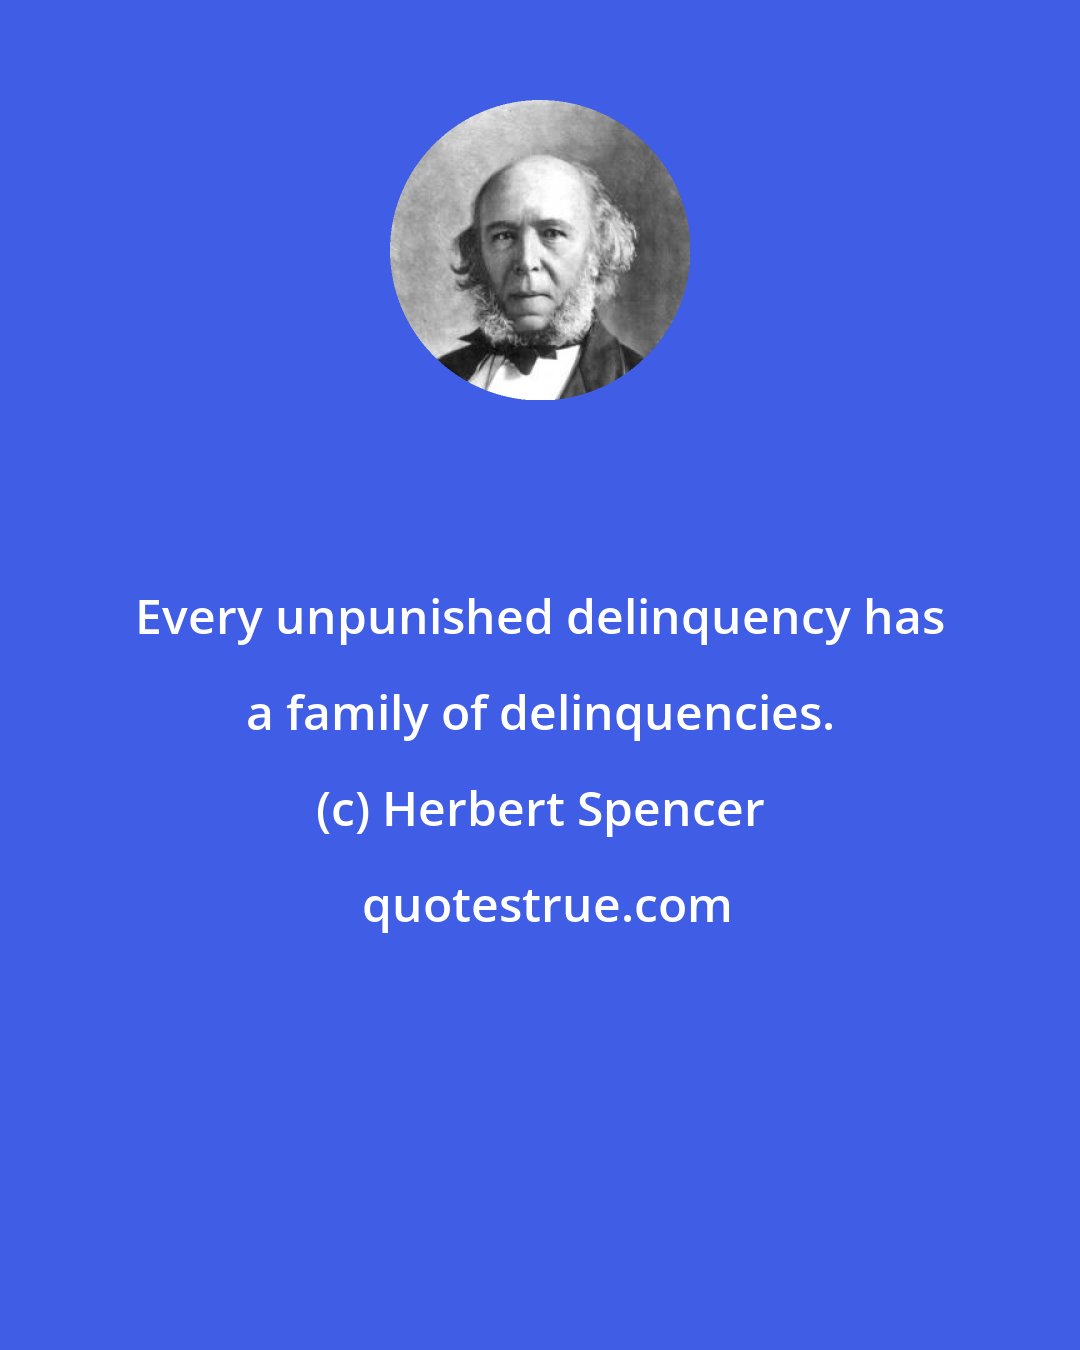 Herbert Spencer: Every unpunished delinquency has a family of delinquencies.